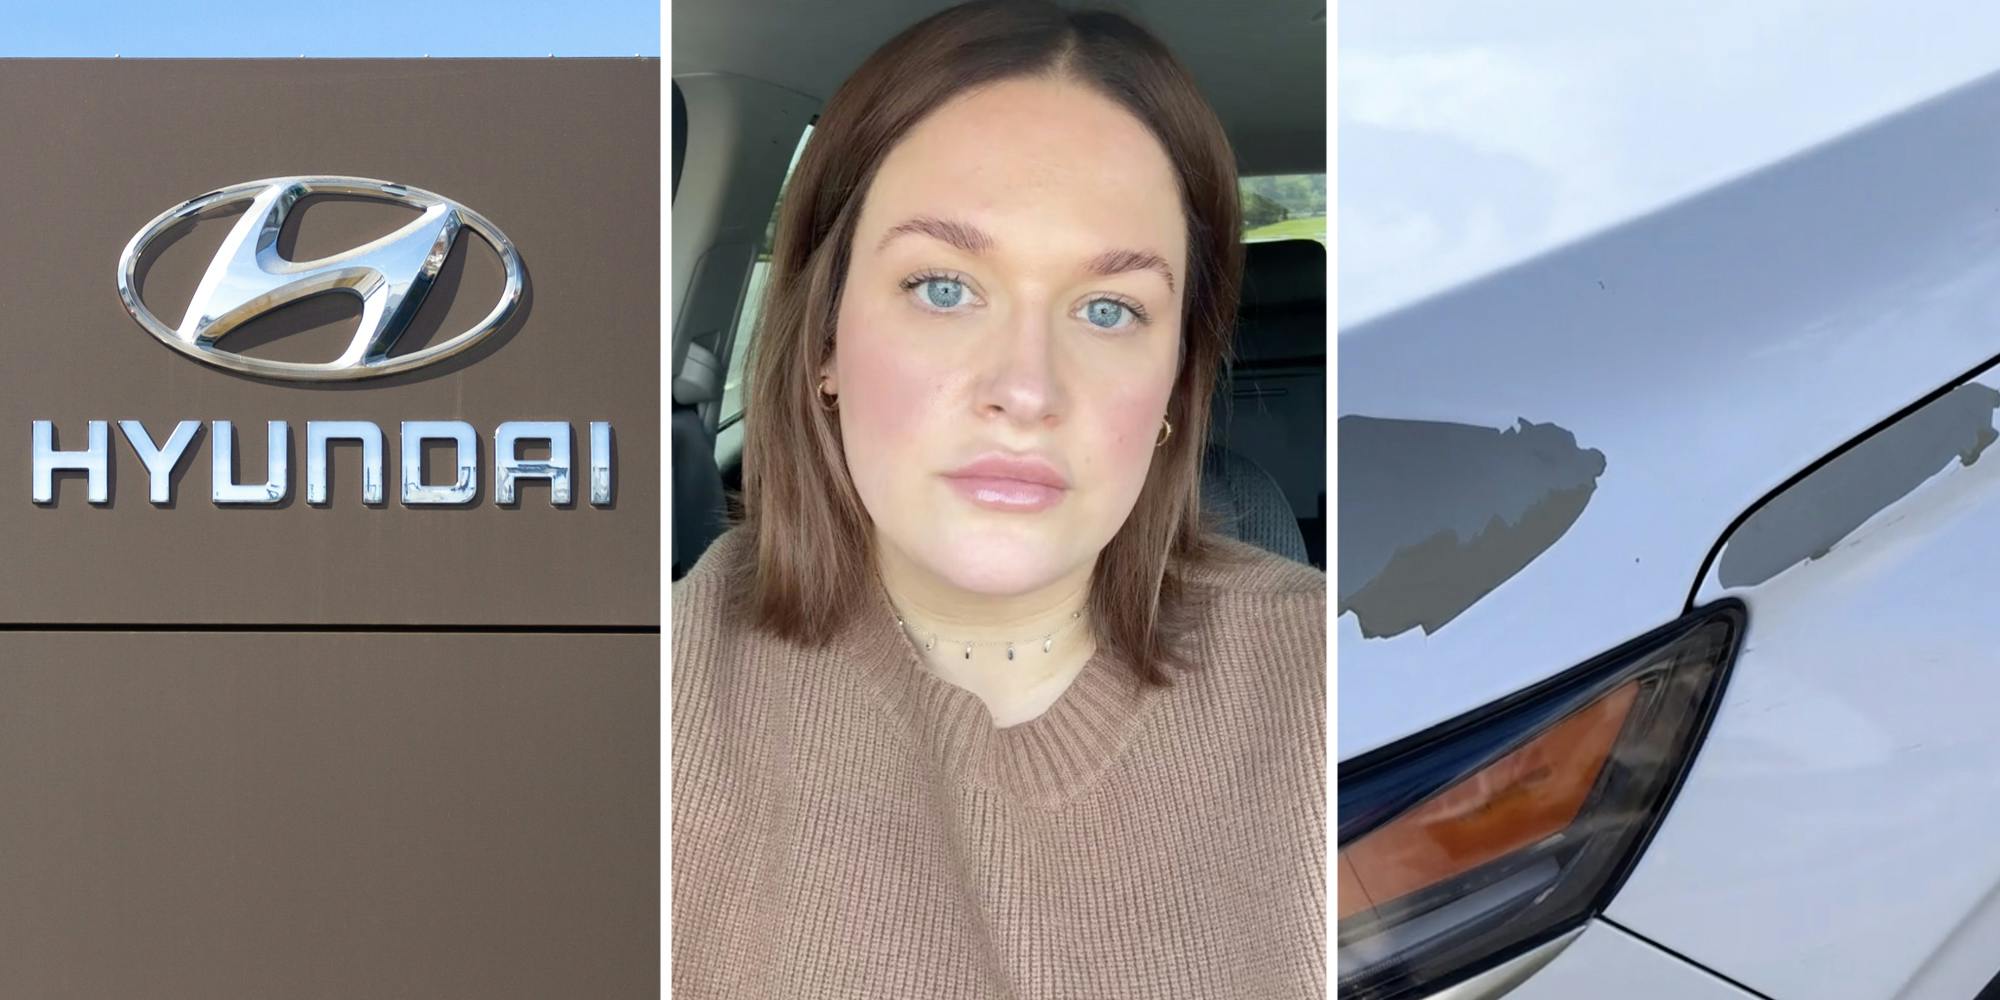 ‘You guys won’t do anything about it’: Woman blasts Hyundai after car starts peeling, notices another car at grocery store parking lot with same problem